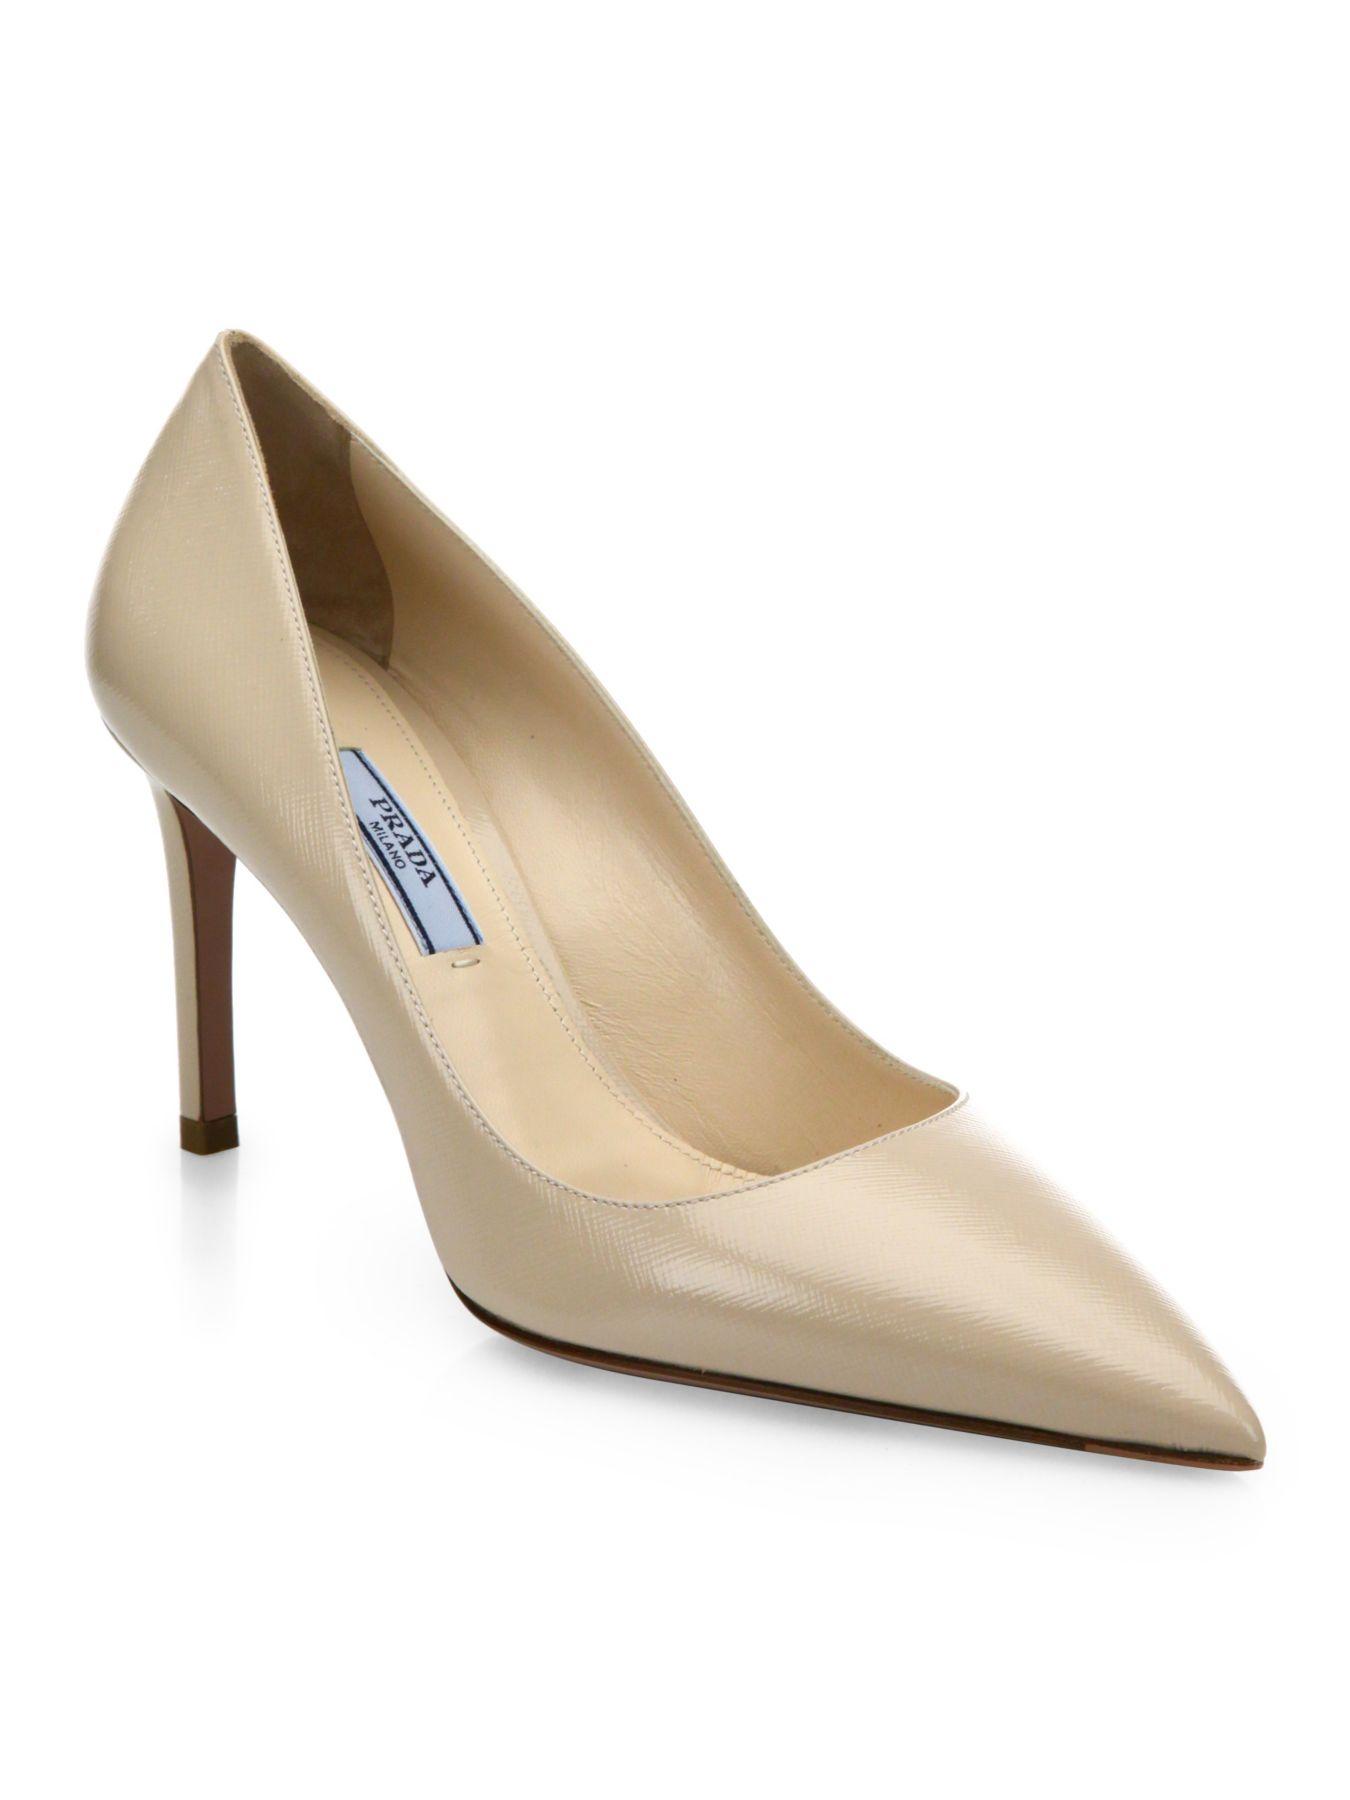 Prada Suede Saffiano Leather Point Toe Pumps in Nude (Pink) - Save 12% ...